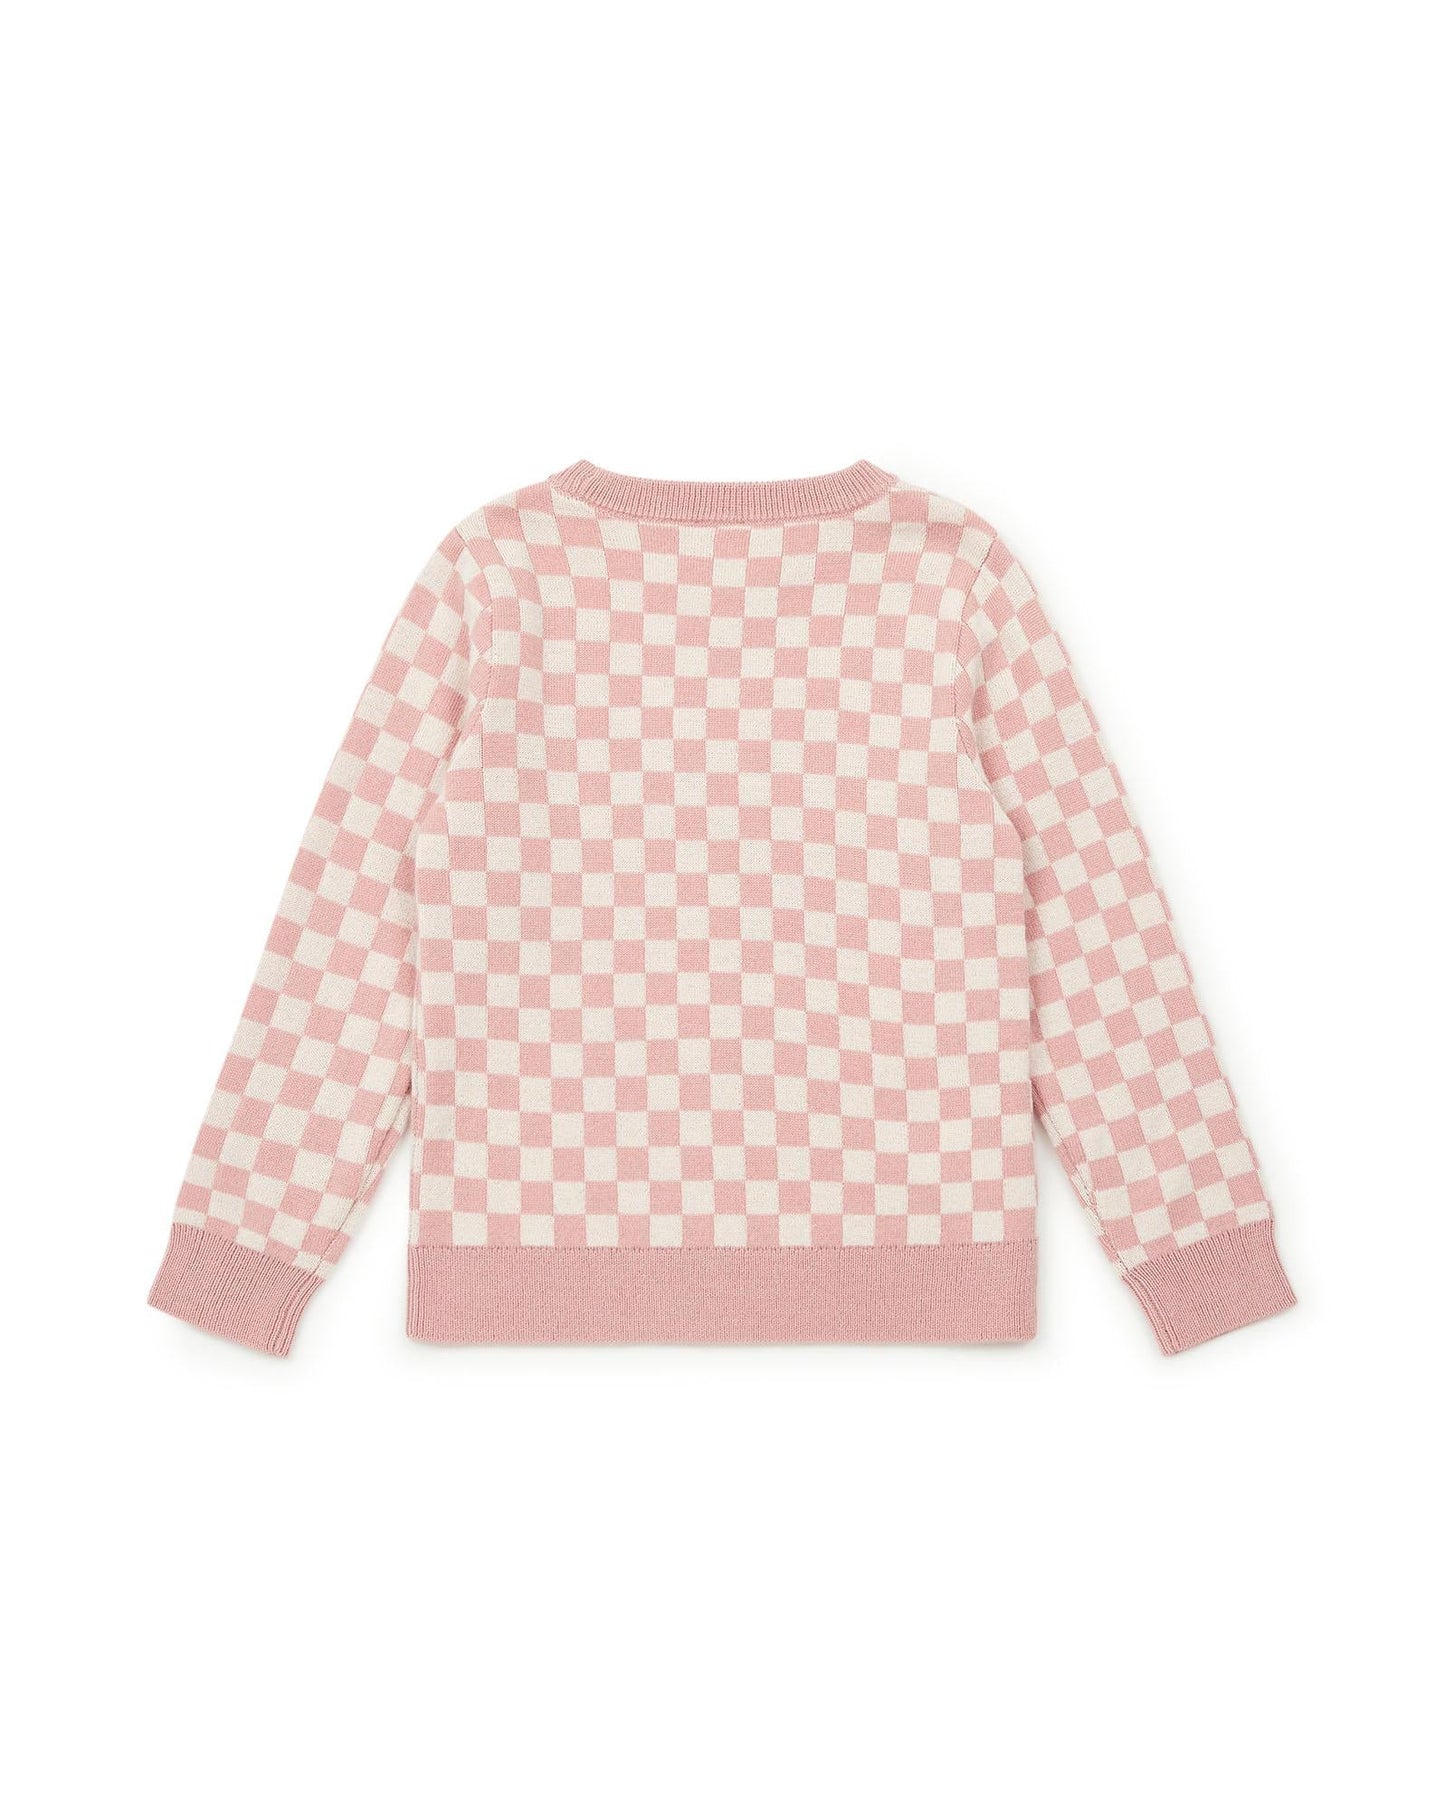 Sweater - checkerboard Pink in jacquard knitting